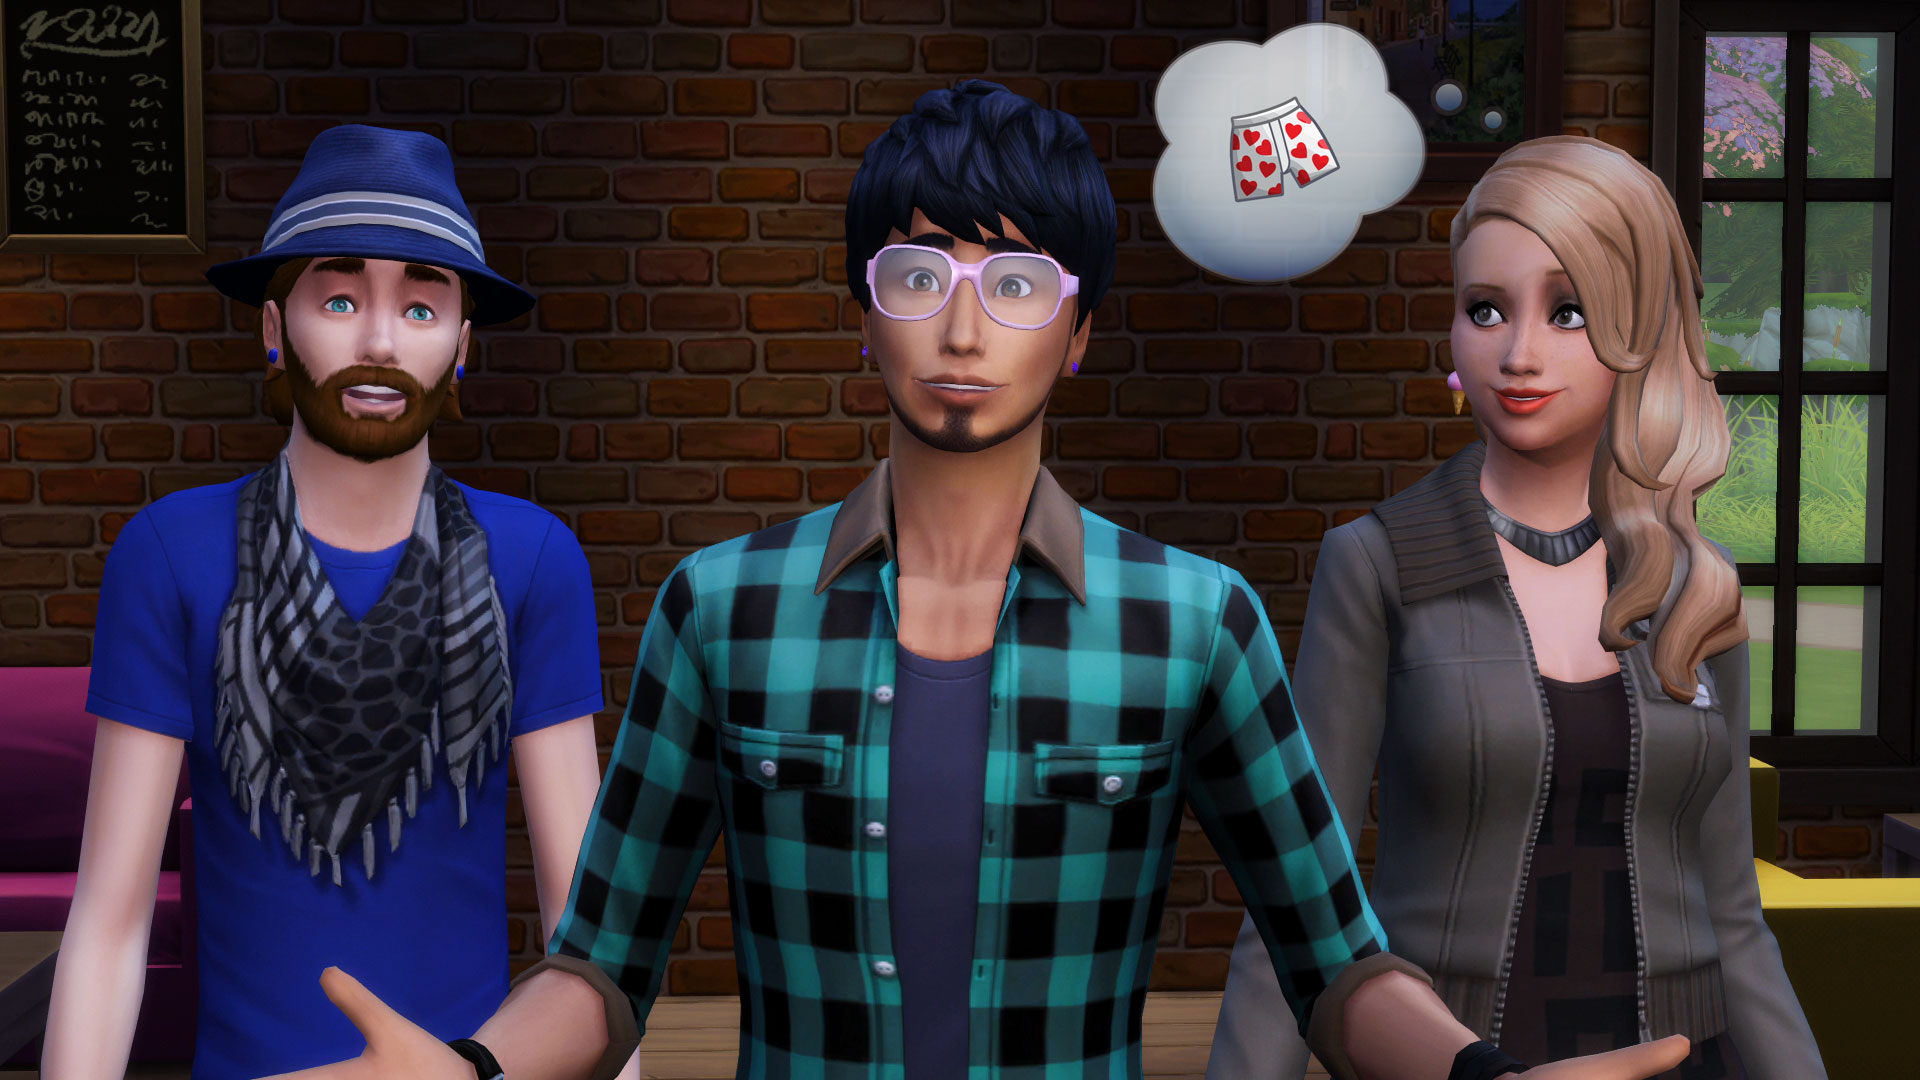 The Sims 4 PC Cheat Codes Revealed, Allow for Infinite Money and Much More